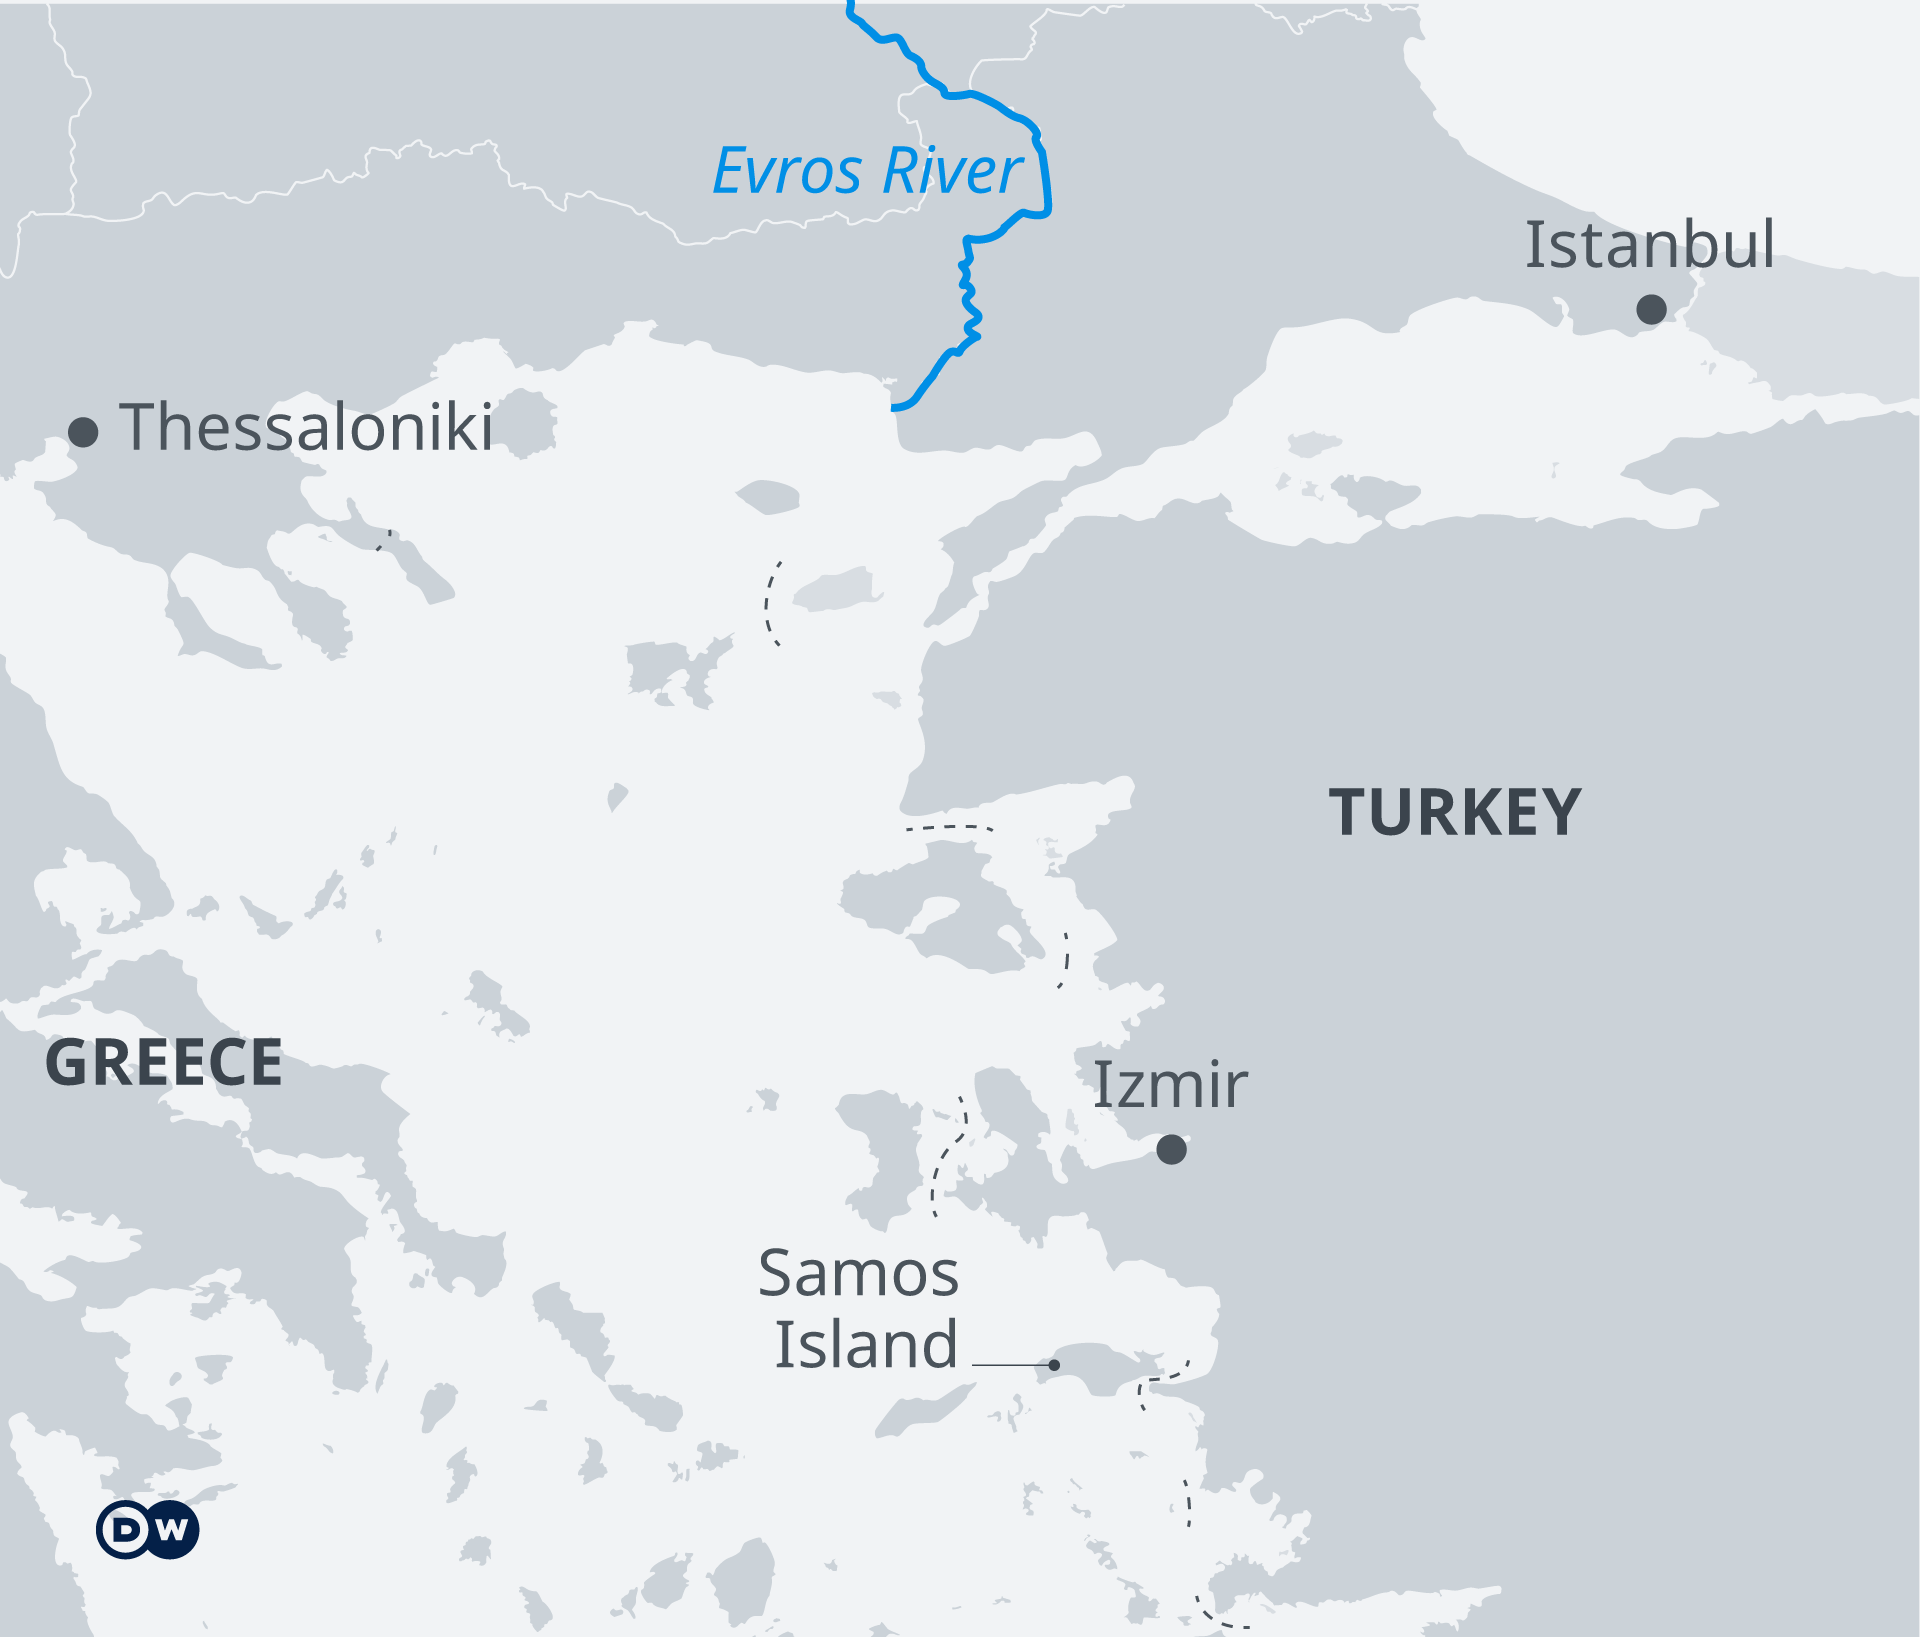 Map showing the land and sea border between Greece and Turkey